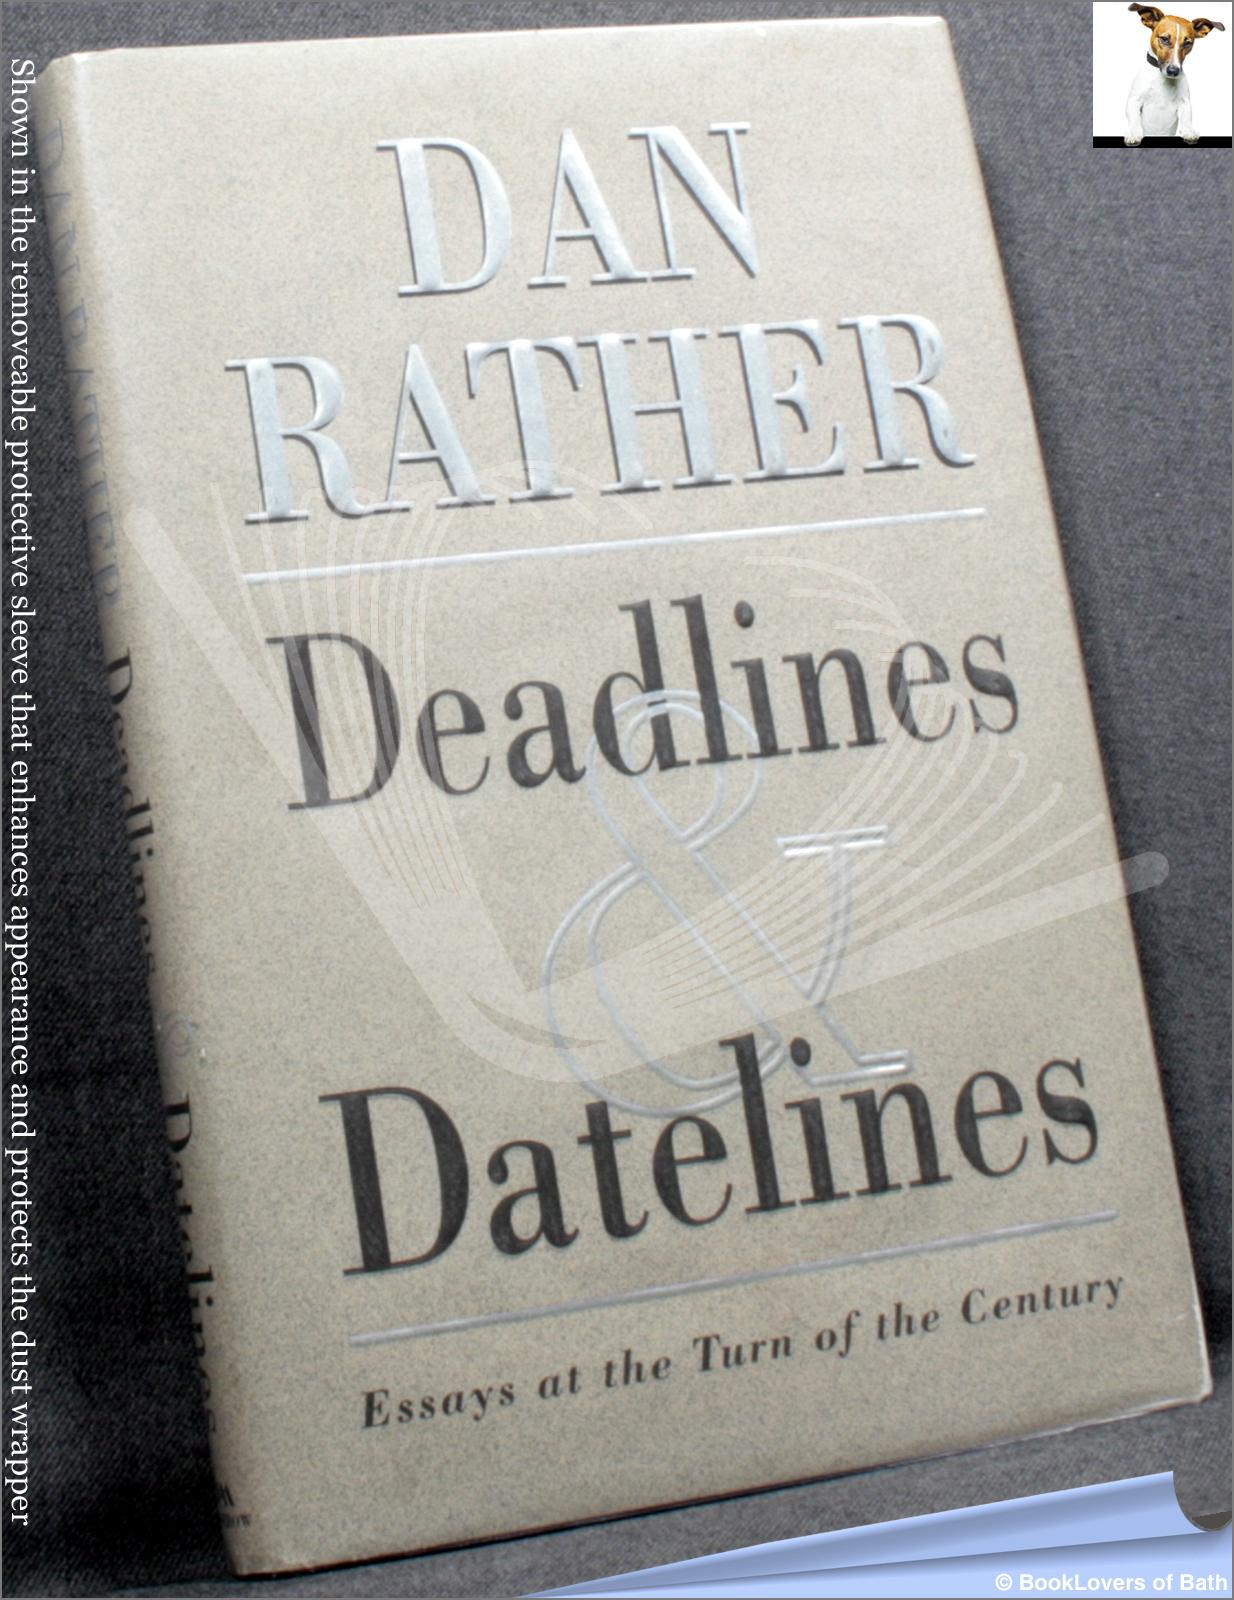 Deadlines and Datelines [Hardcover] by Rather, Dan